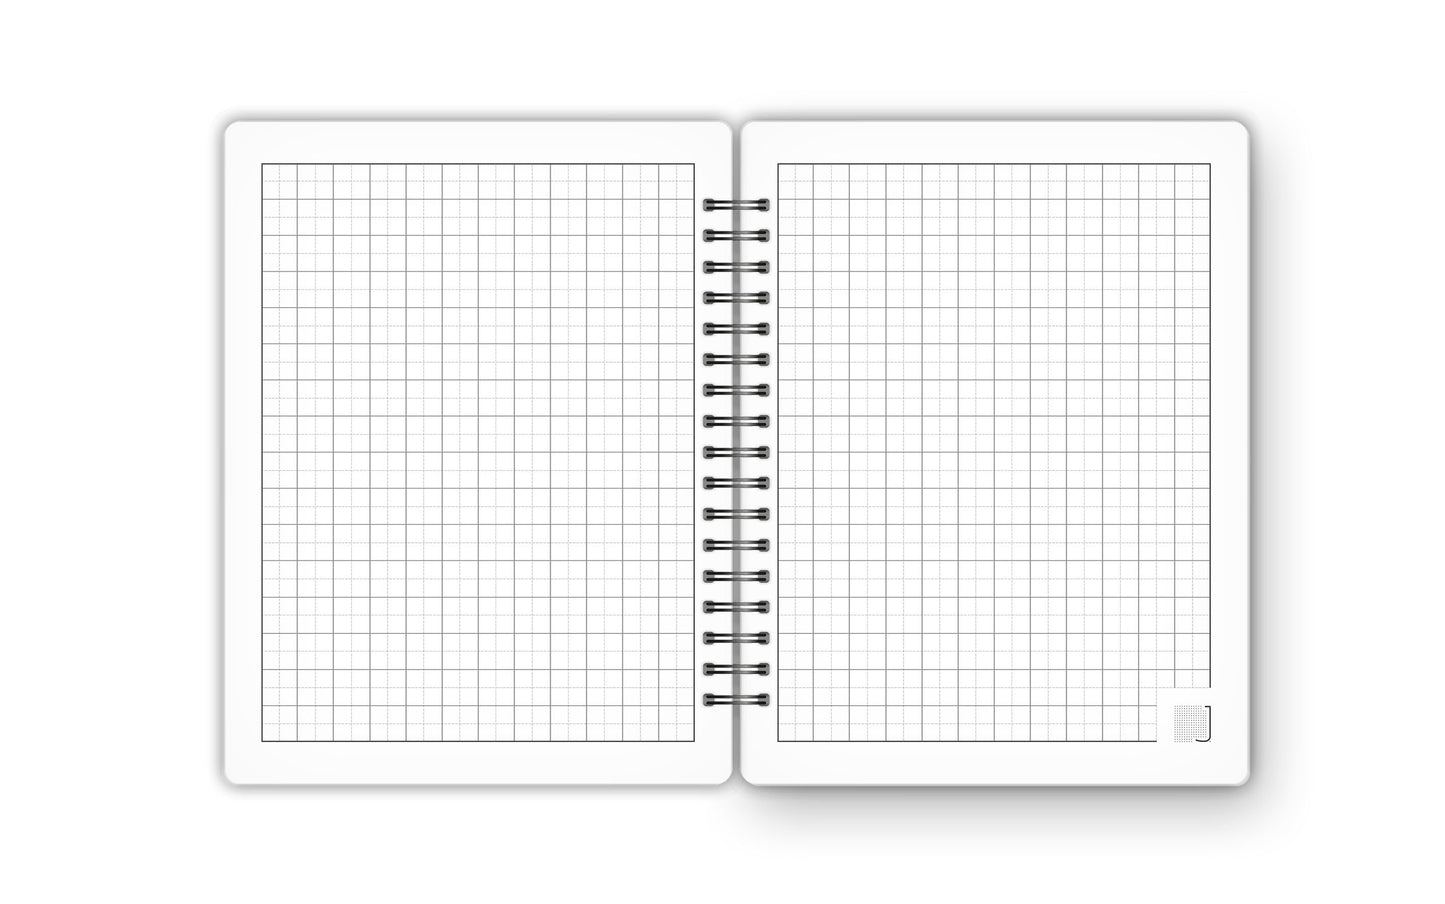 Square Grid - 18X14 cm - 75 Sheets | Minimal Leaf 03 - from Journals